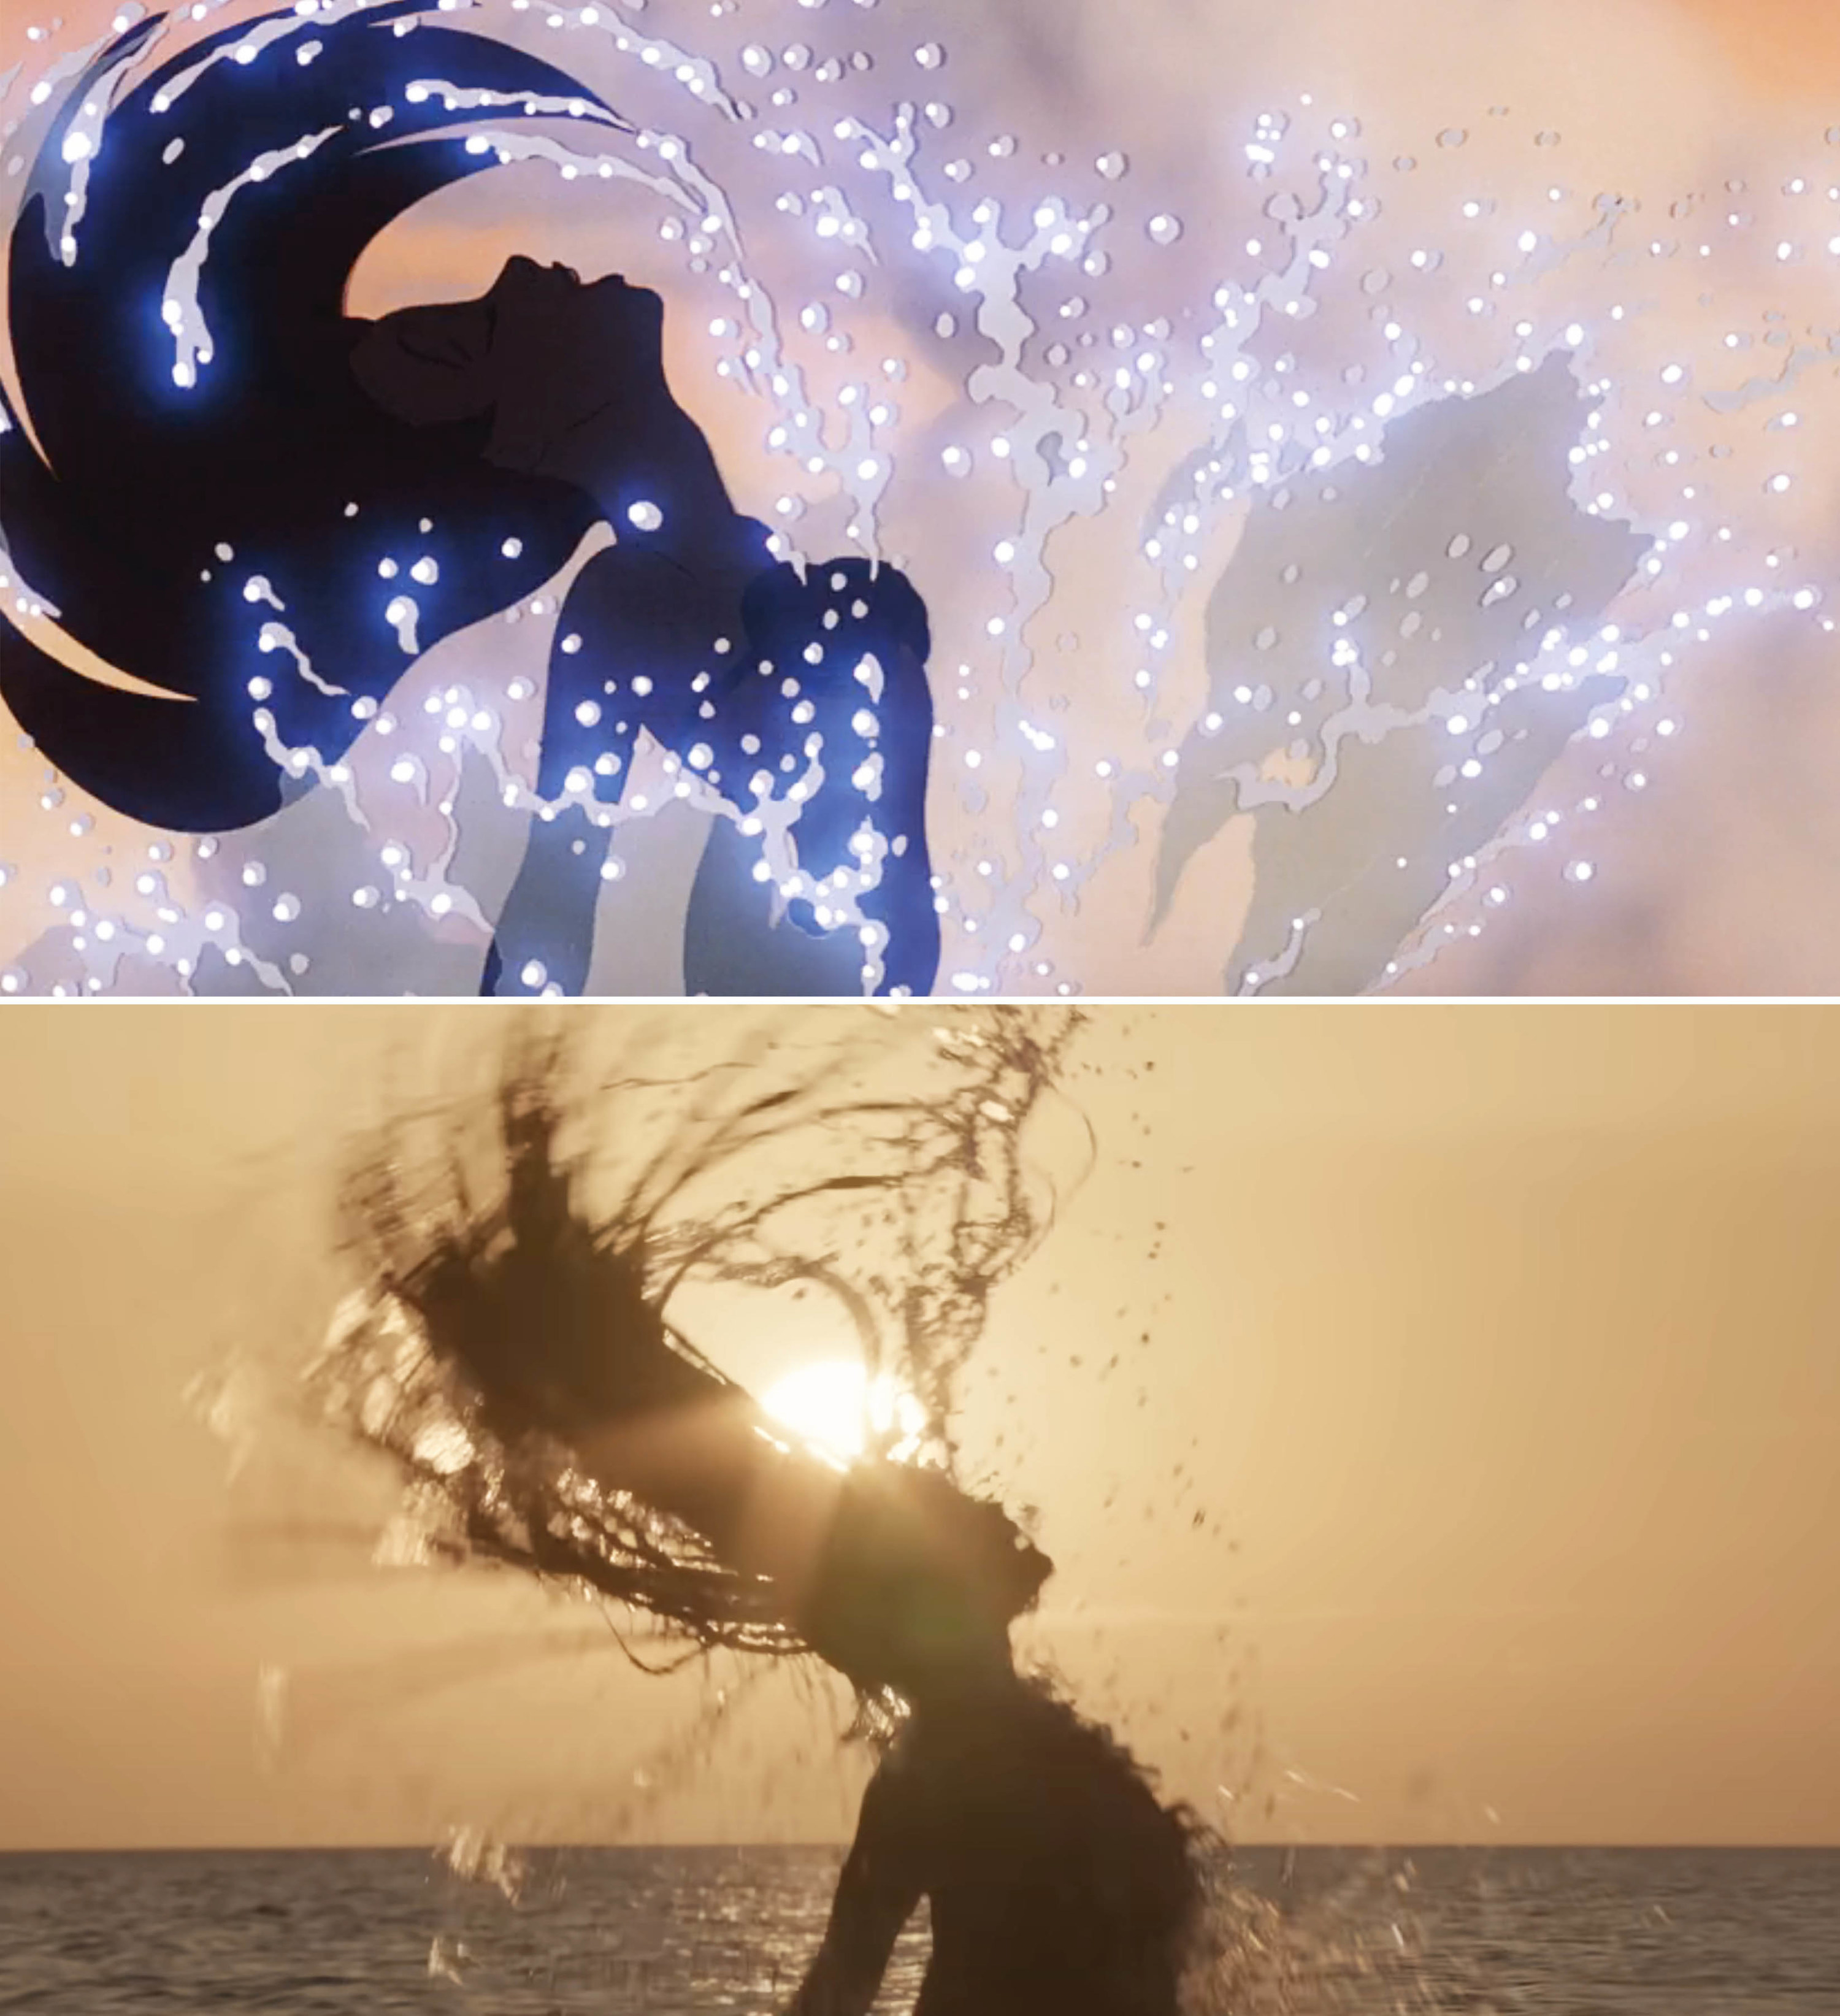 Screenshots from both &quot;Little Mermaid&quot; films